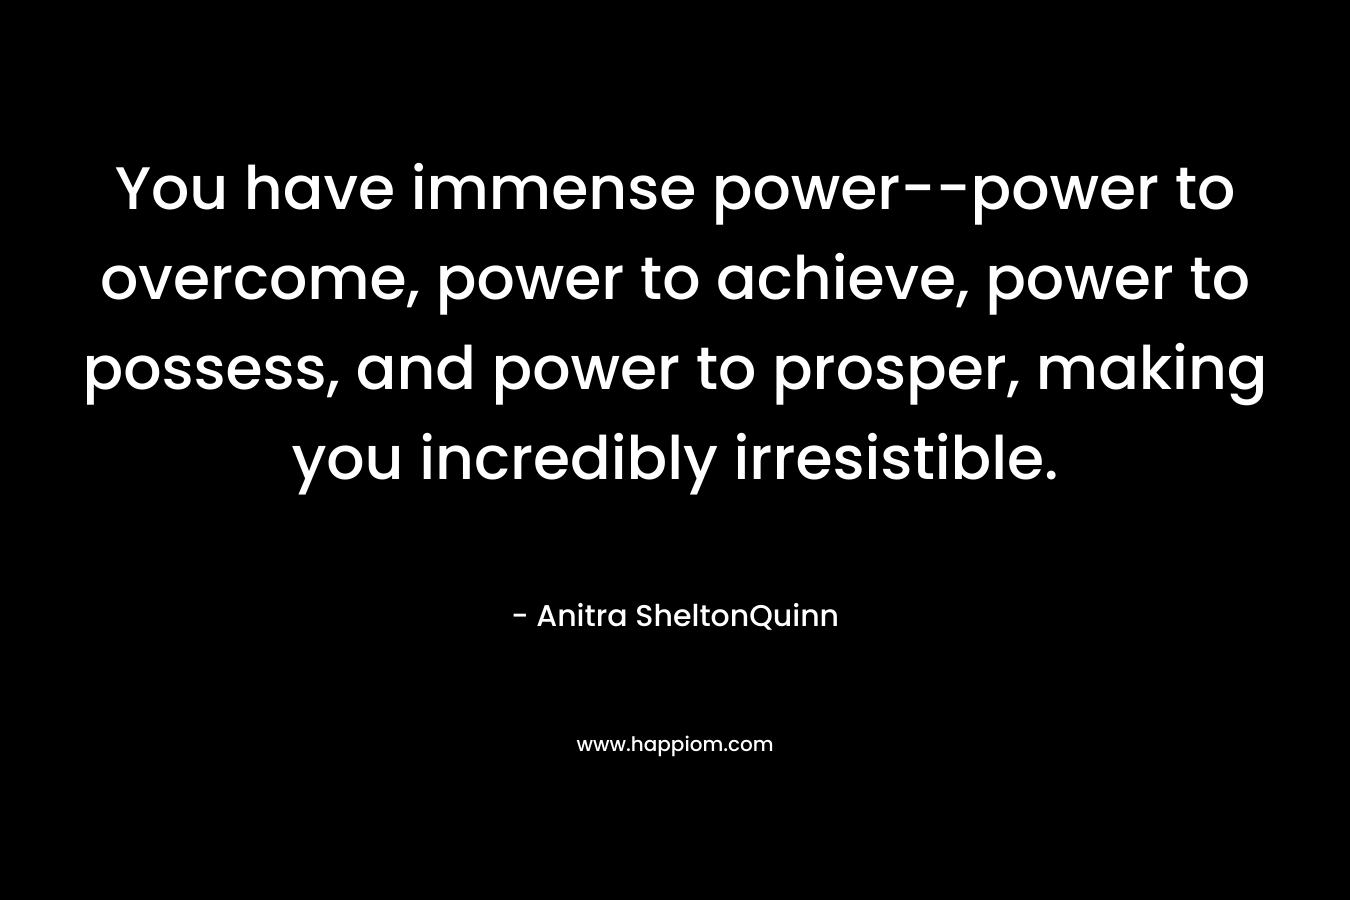 You have immense power–power to overcome, power to achieve, power to possess, and power to prosper, making you incredibly irresistible. – Anitra SheltonQuinn